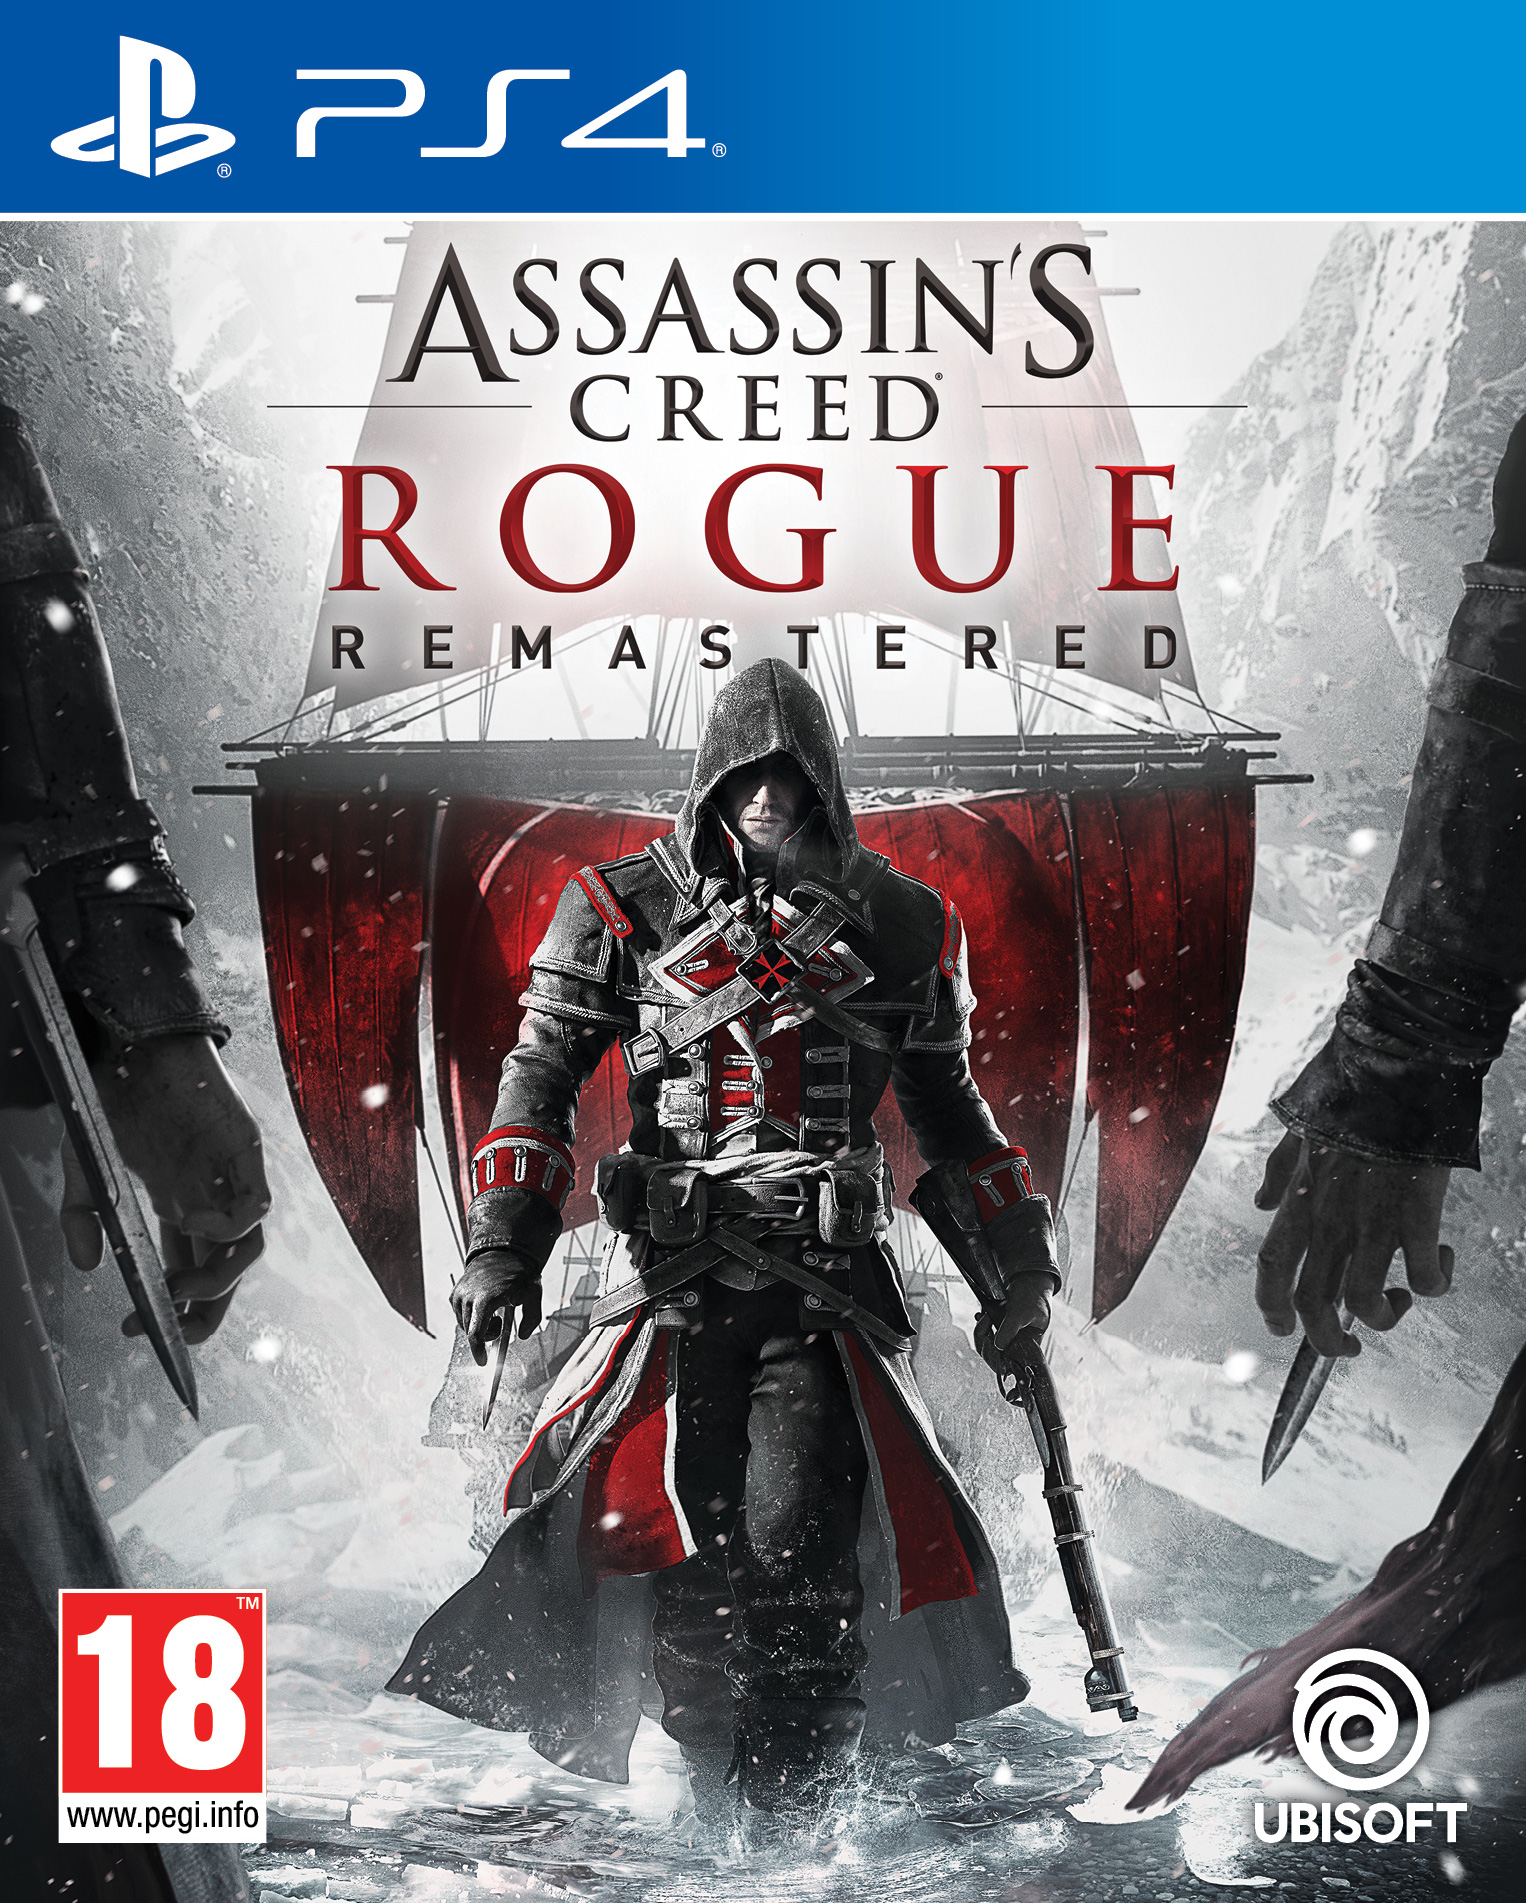 Creed игра ps4. Assassins Creed Rogue Xbox one.